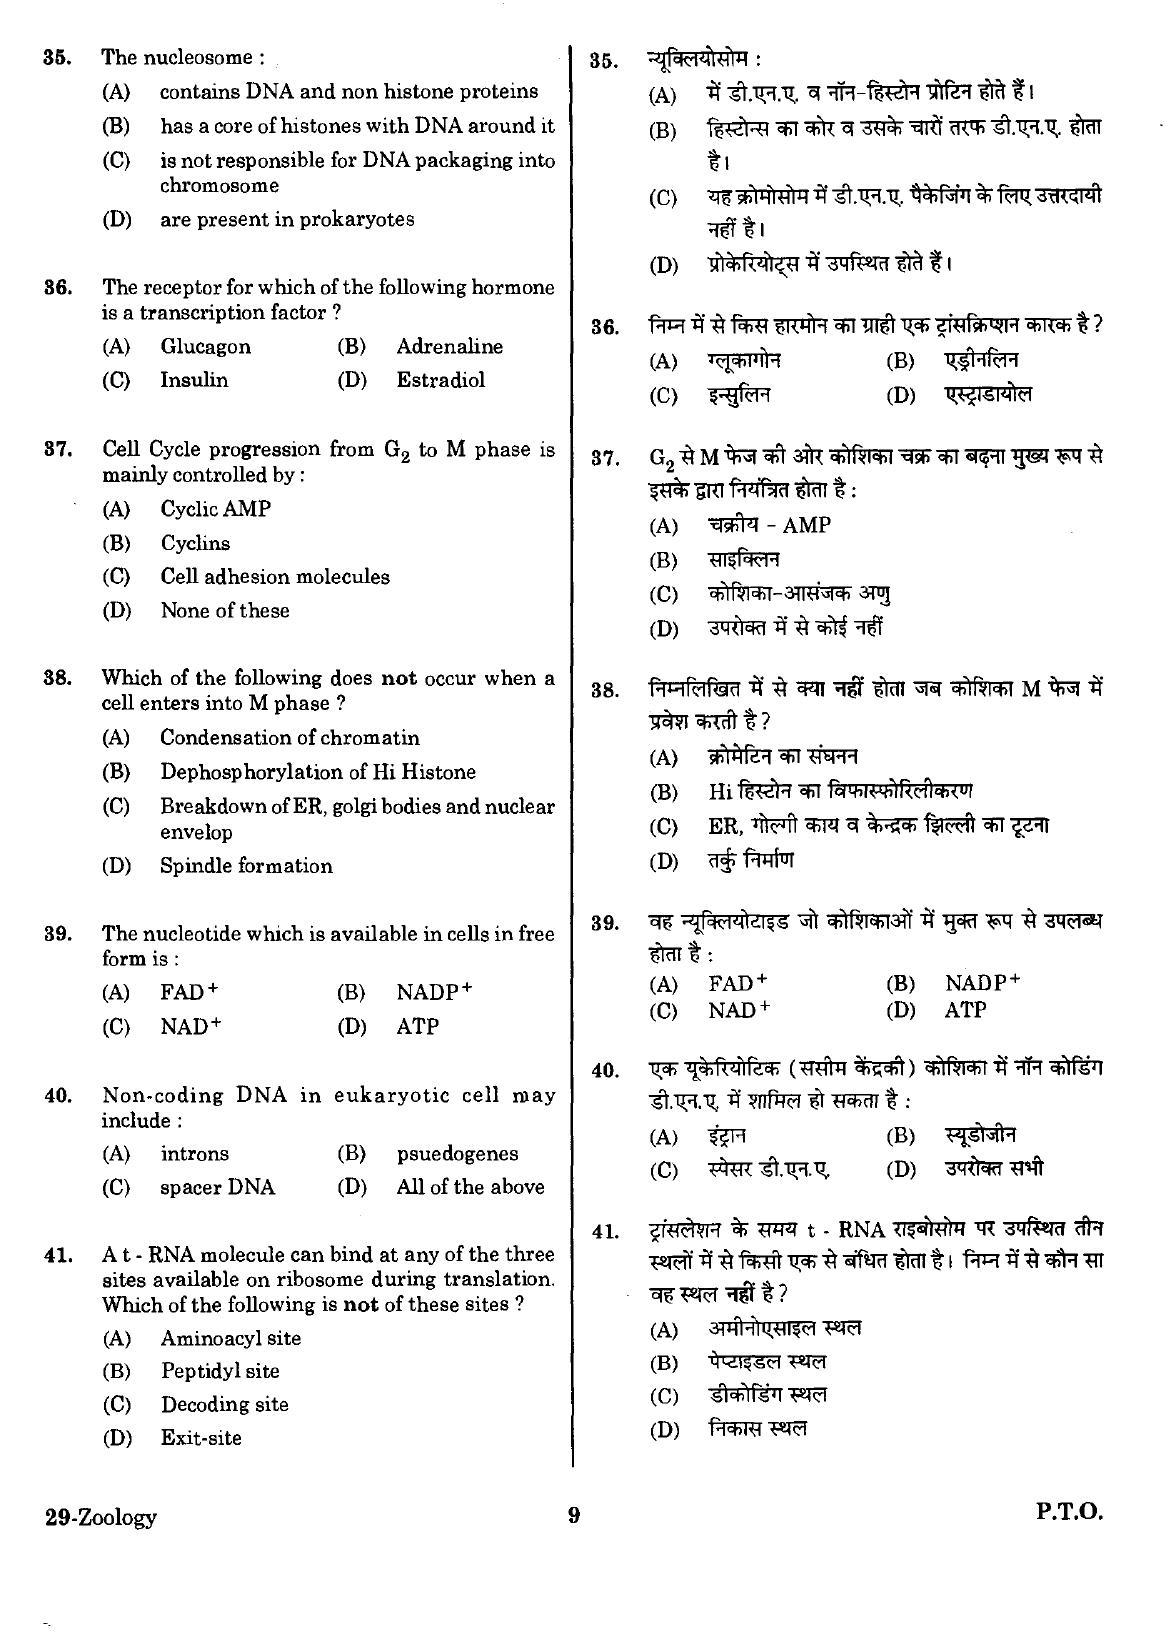 URATPG Zoology Sample Question Paper 2018 - Page 8